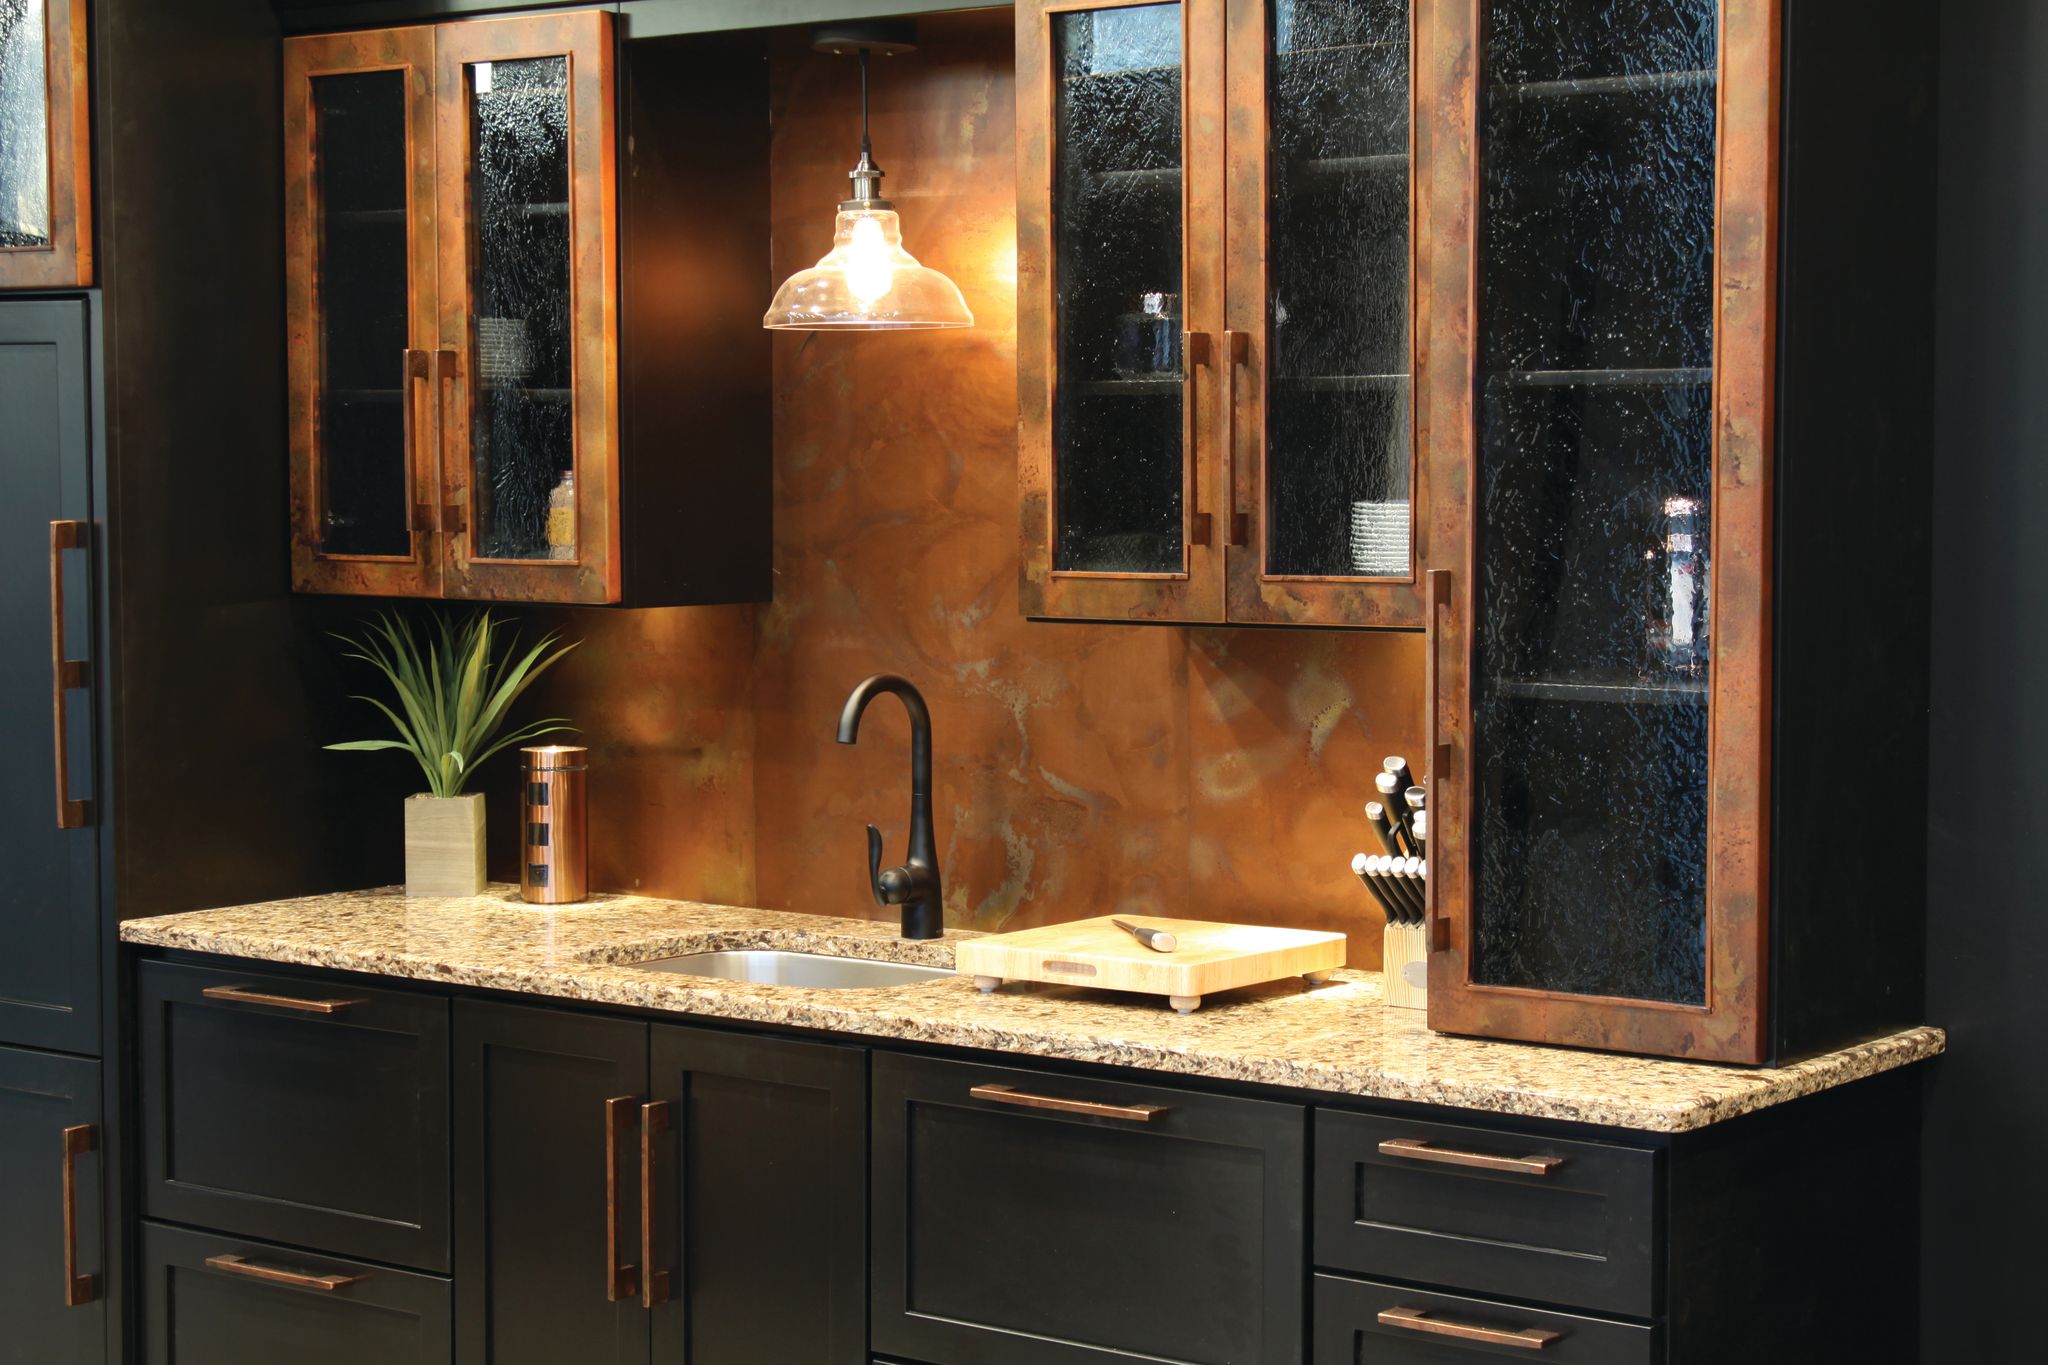 A metal cabinet in a darker style with an aged copper finish.